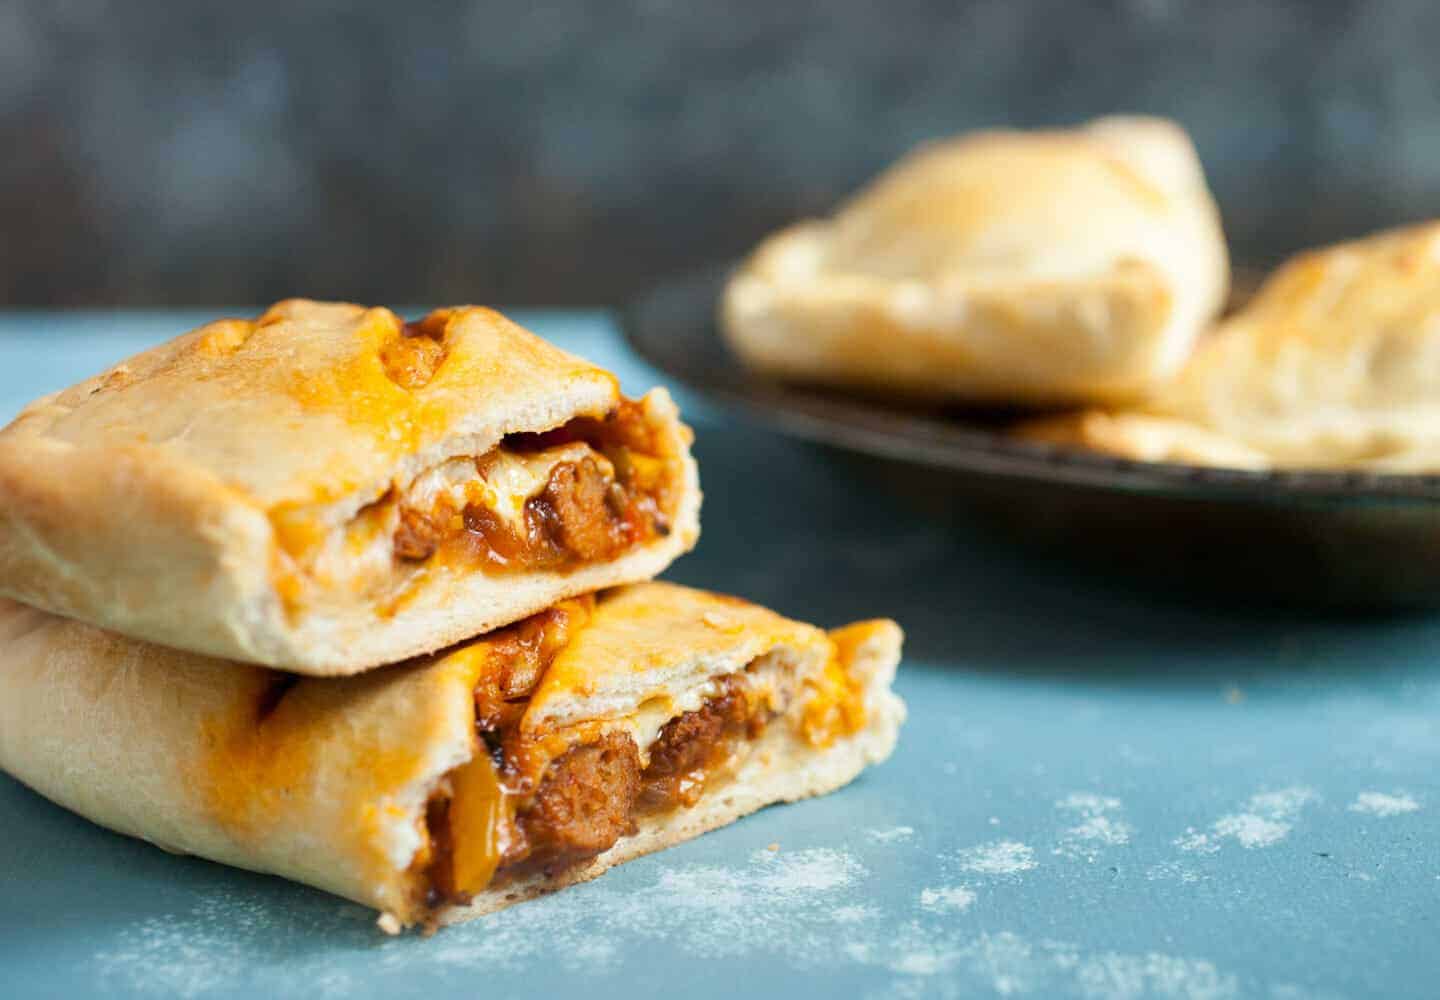 Sausage and Pepper Hot Pockets: These delicious homemade hot pockets are stuffed to the max with sausage, peppers, and cheese. They freeze perfectly as well and make for quick meals whenever you need one! | macheesmo.com